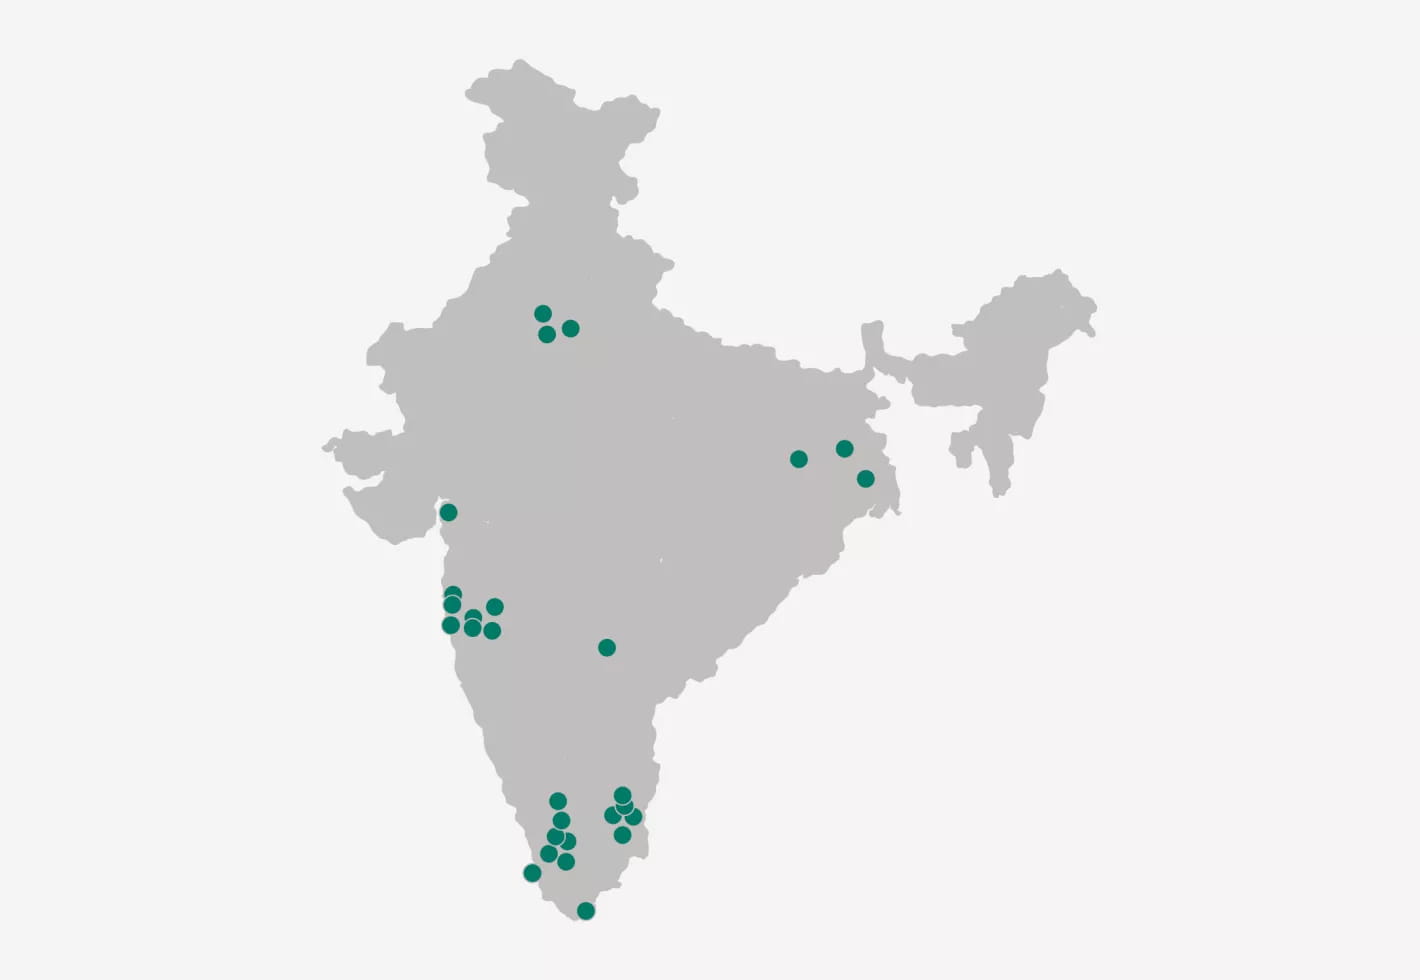 Our presence in India